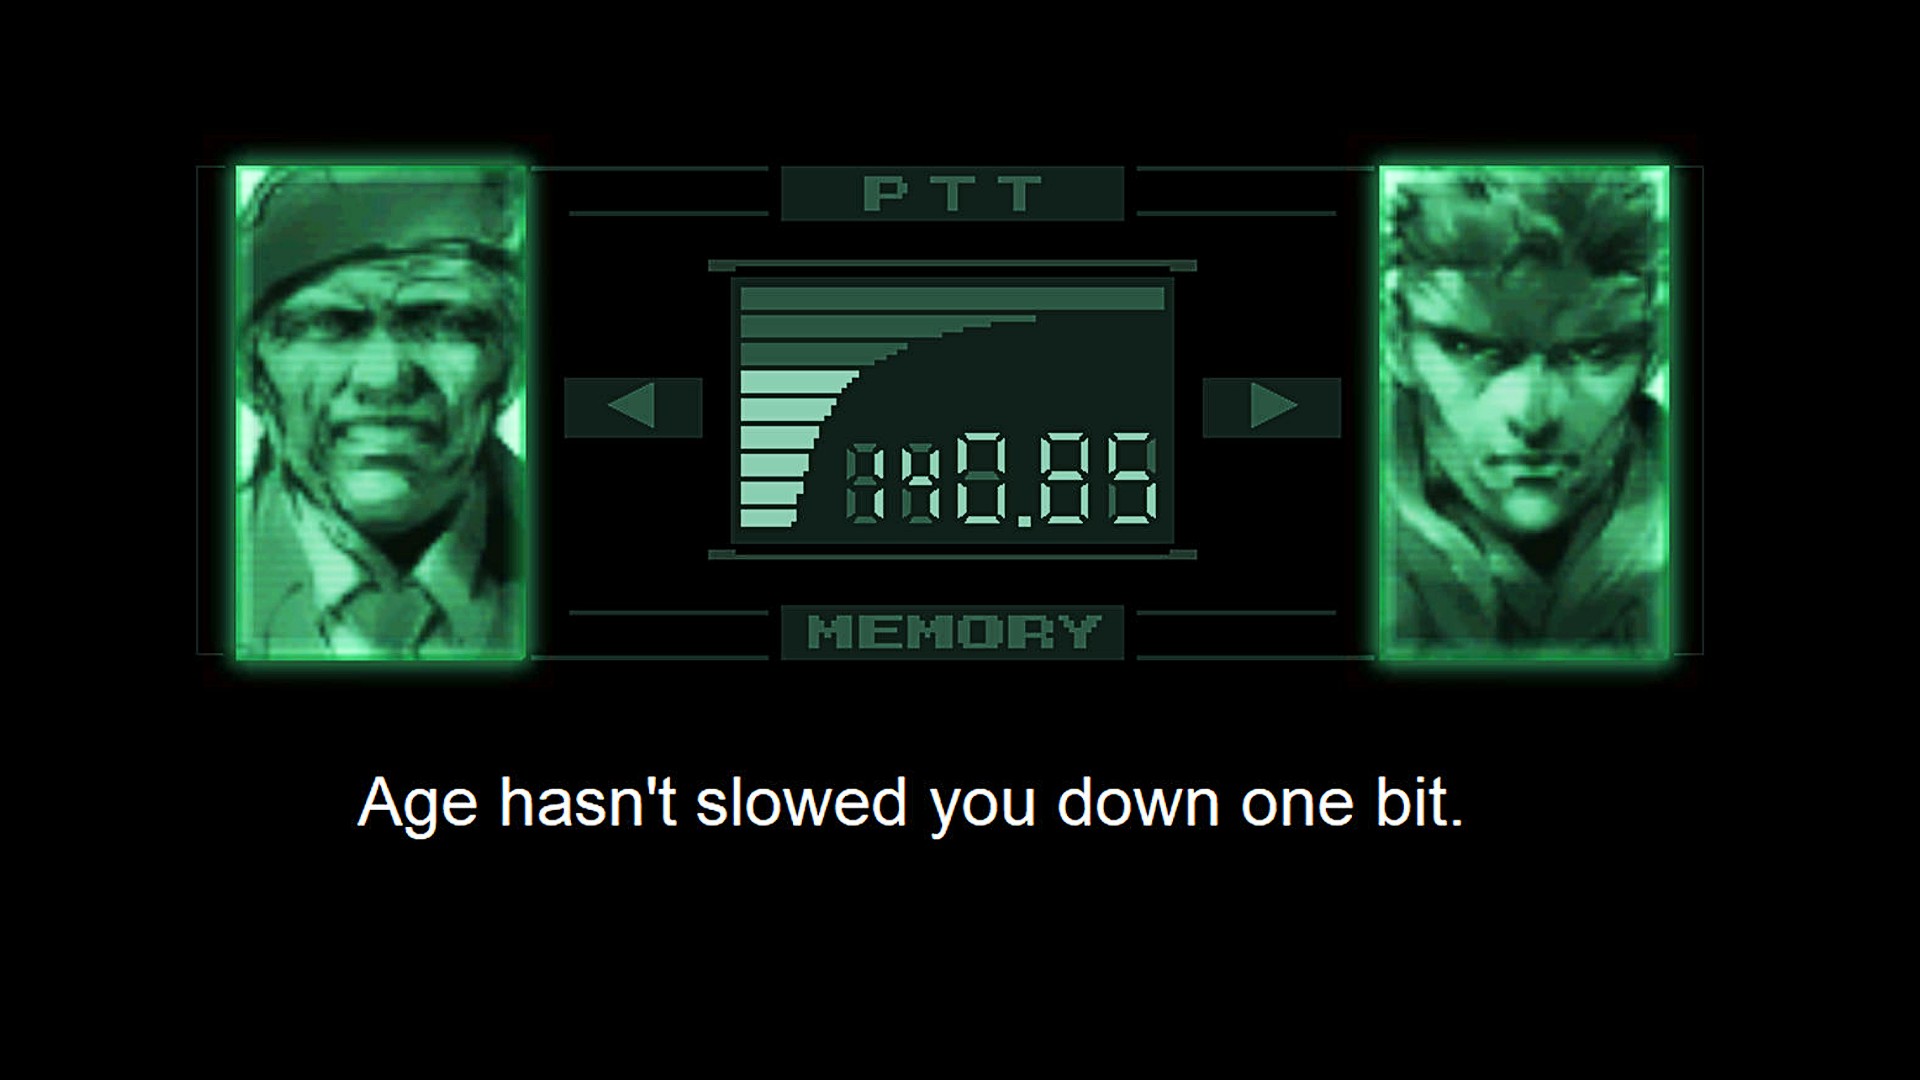 A dialog in Metal Gear Solid